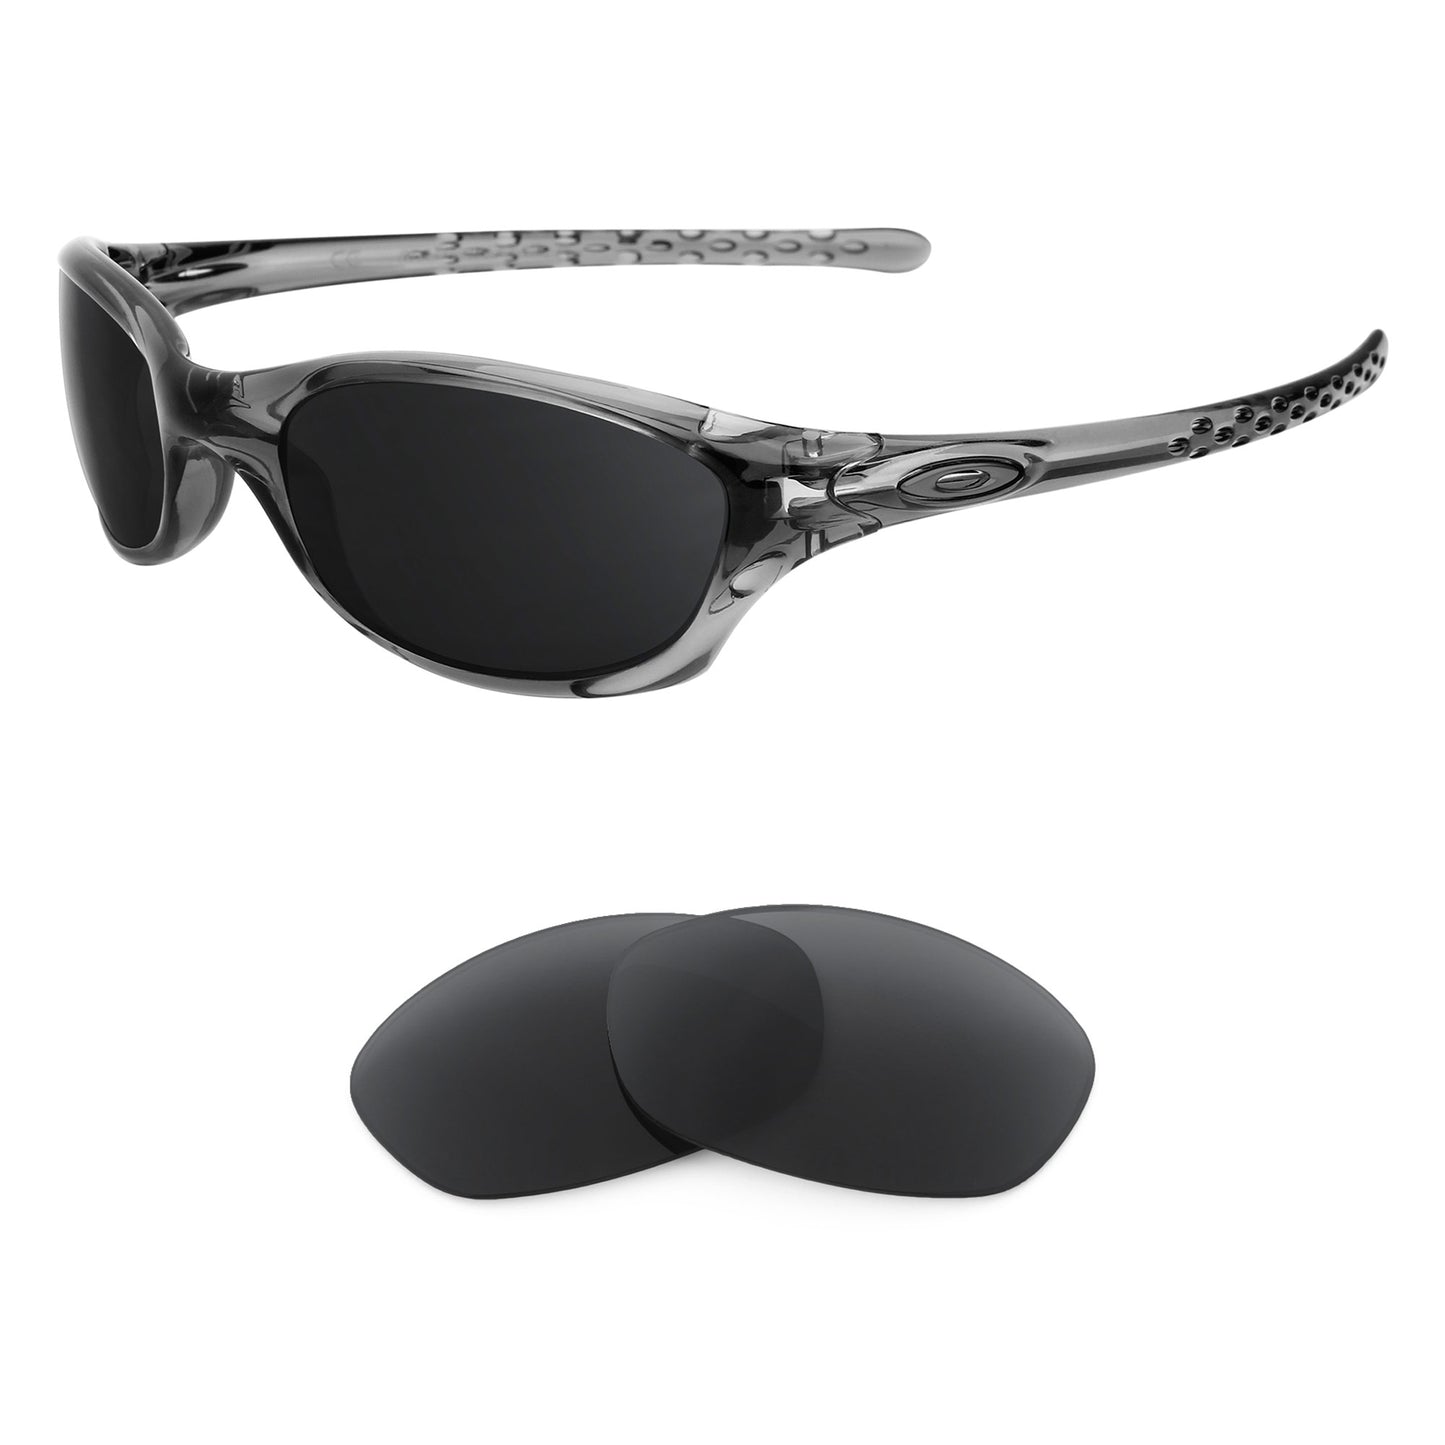 Oakley Fives 2.0 sunglasses with replacement lenses